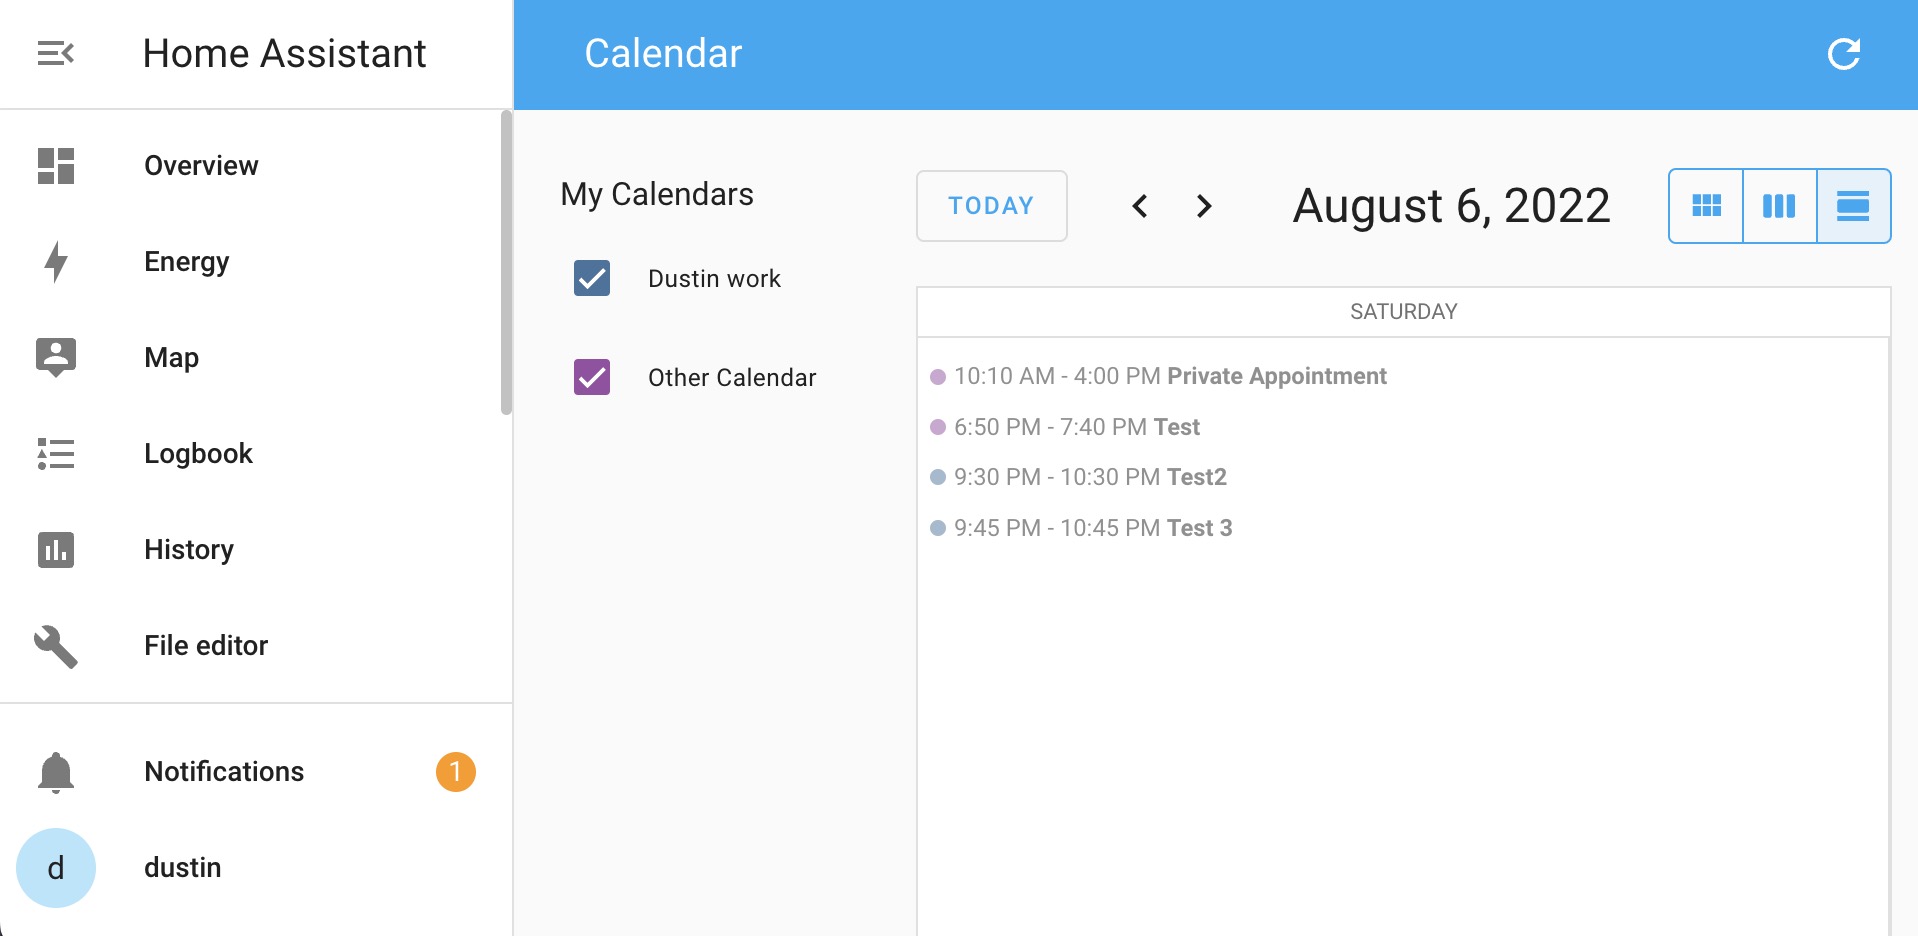 Home Assistant calendar with test events